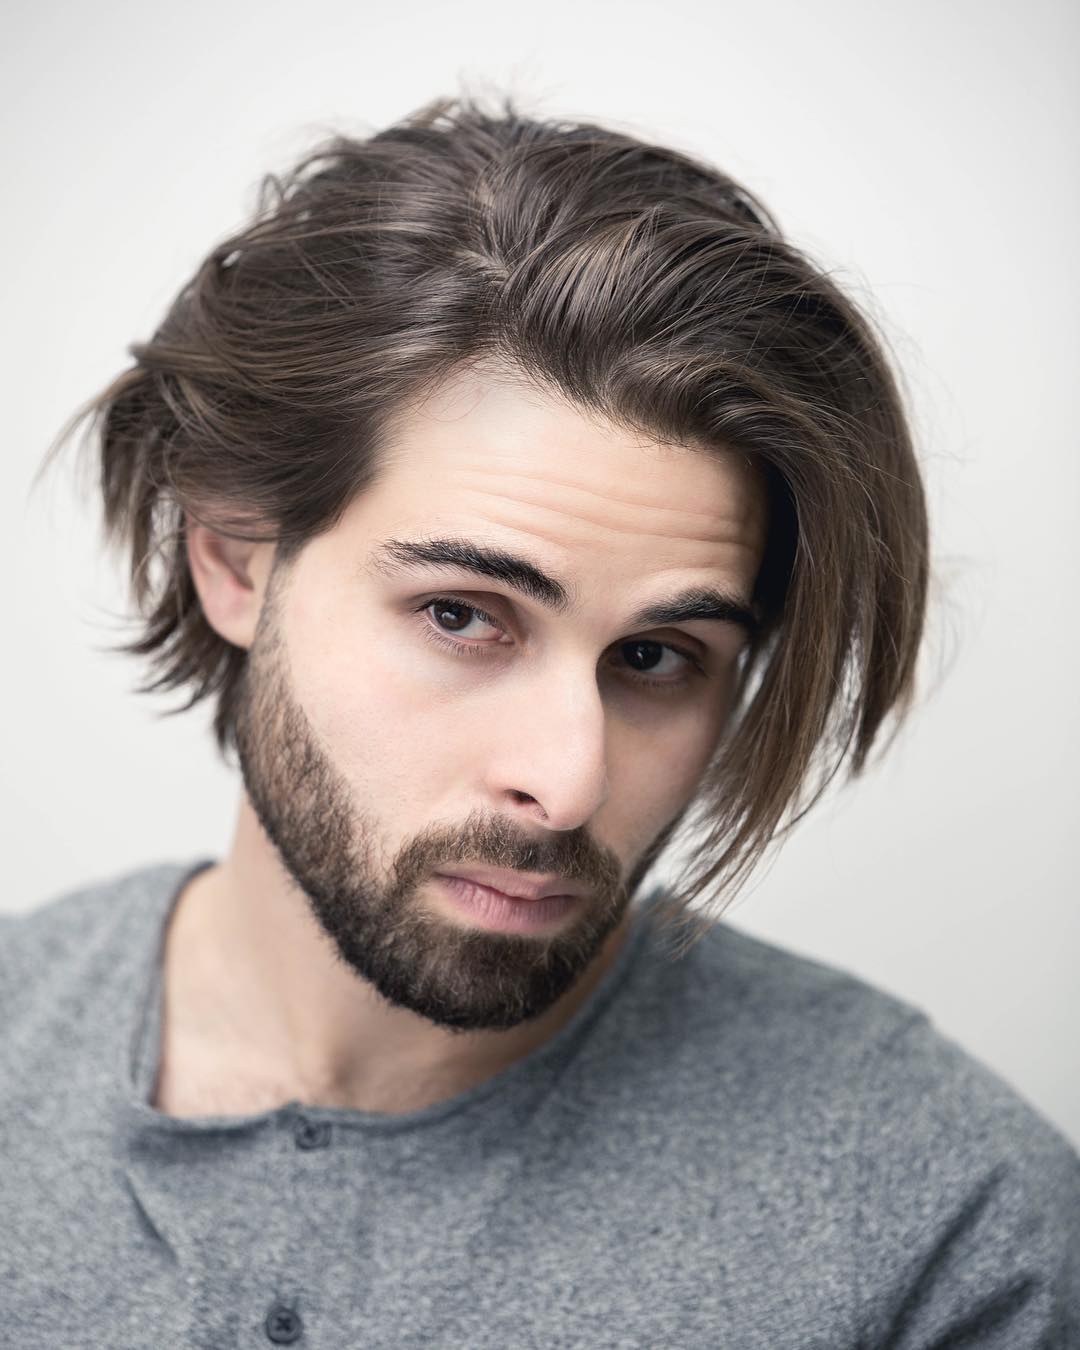 The Best Long Hairstyles For Men And How To Grow Your Hair Out  Growing  out hair Growing your hair out Long hair styles men